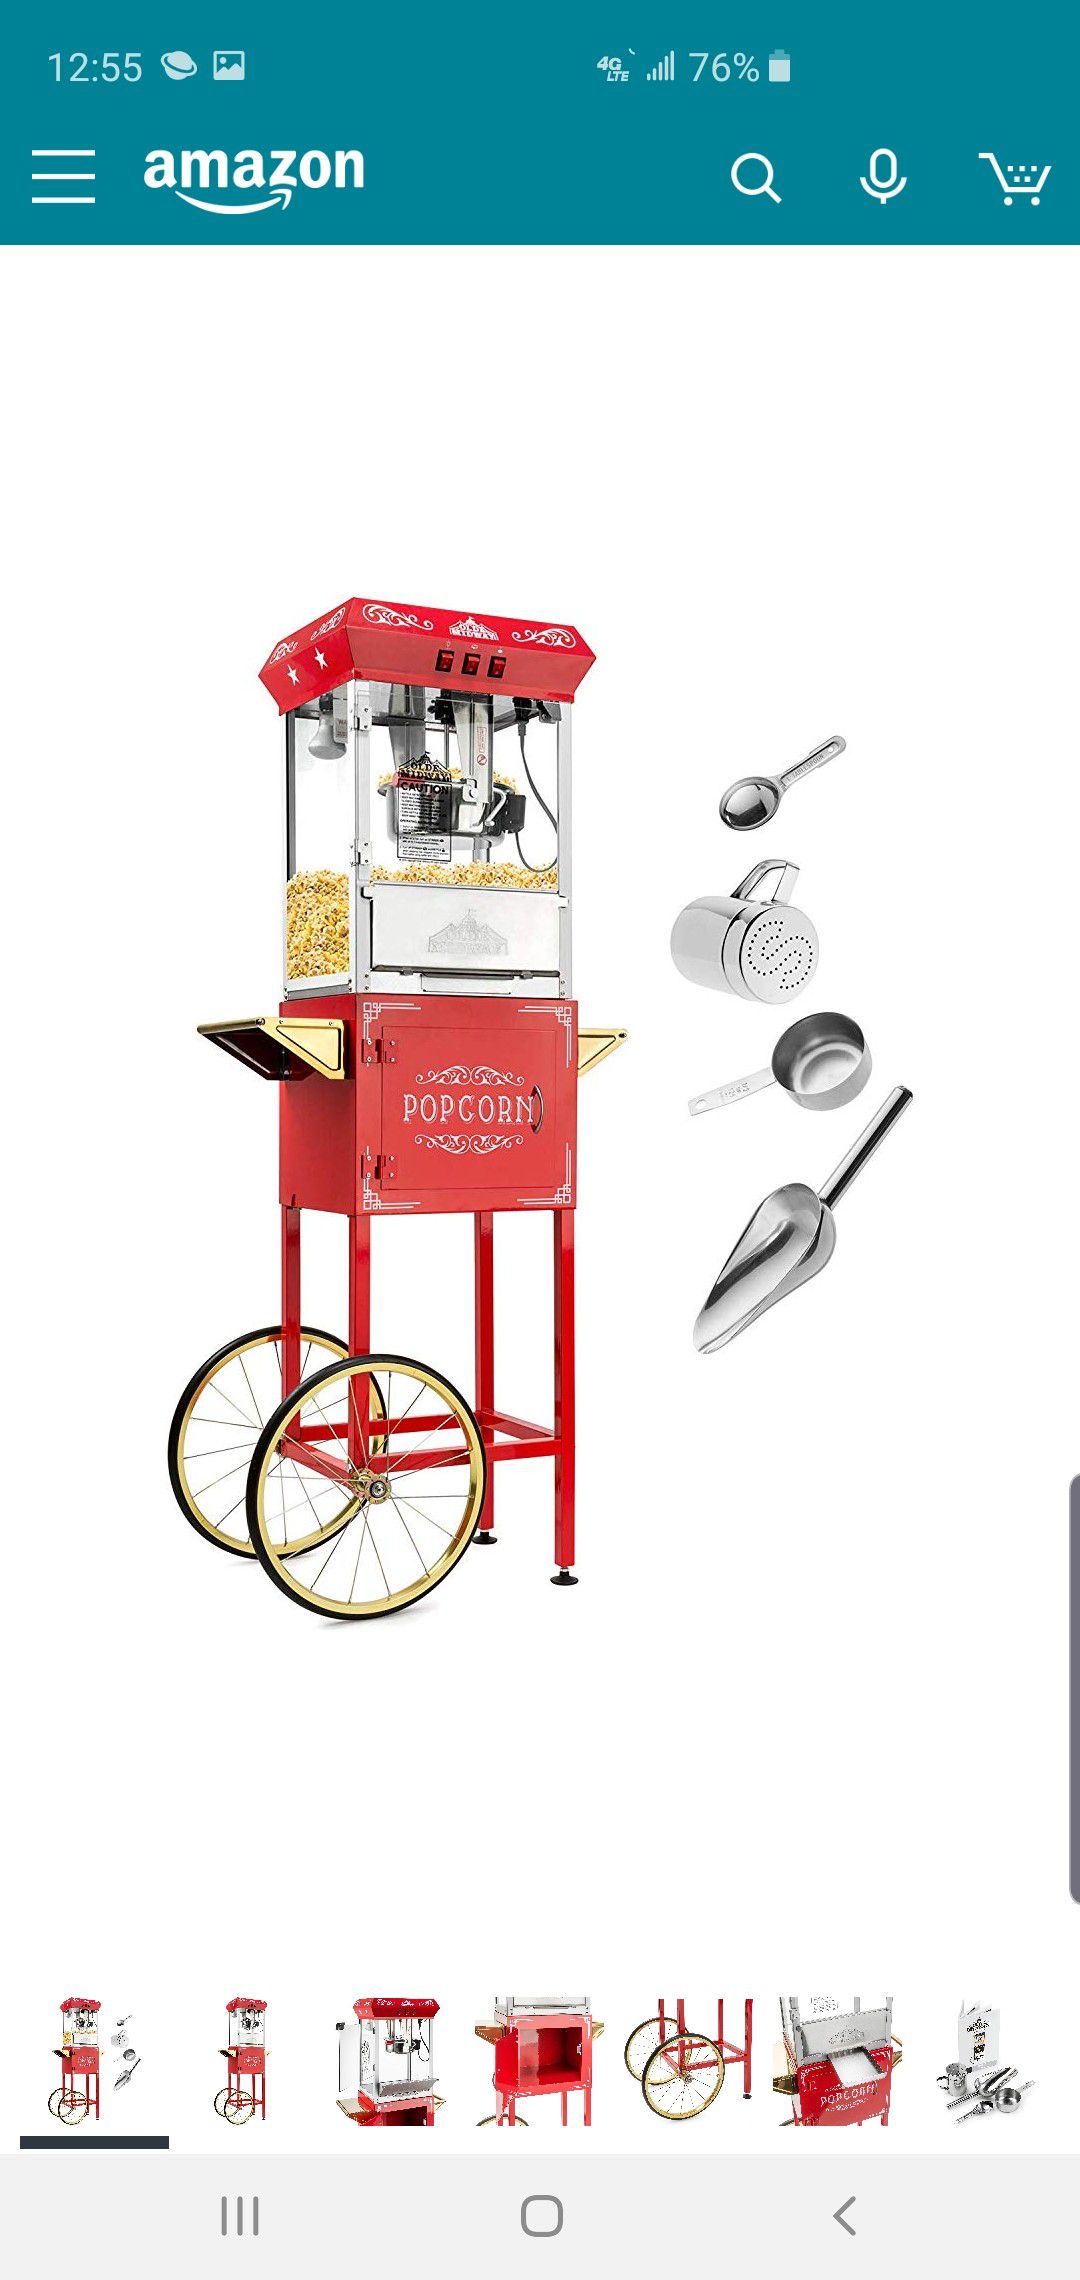 Olde Midway Vintage Style Popcorn Machine Maker Popper with Cart and 8-Ounce Kettle - Red